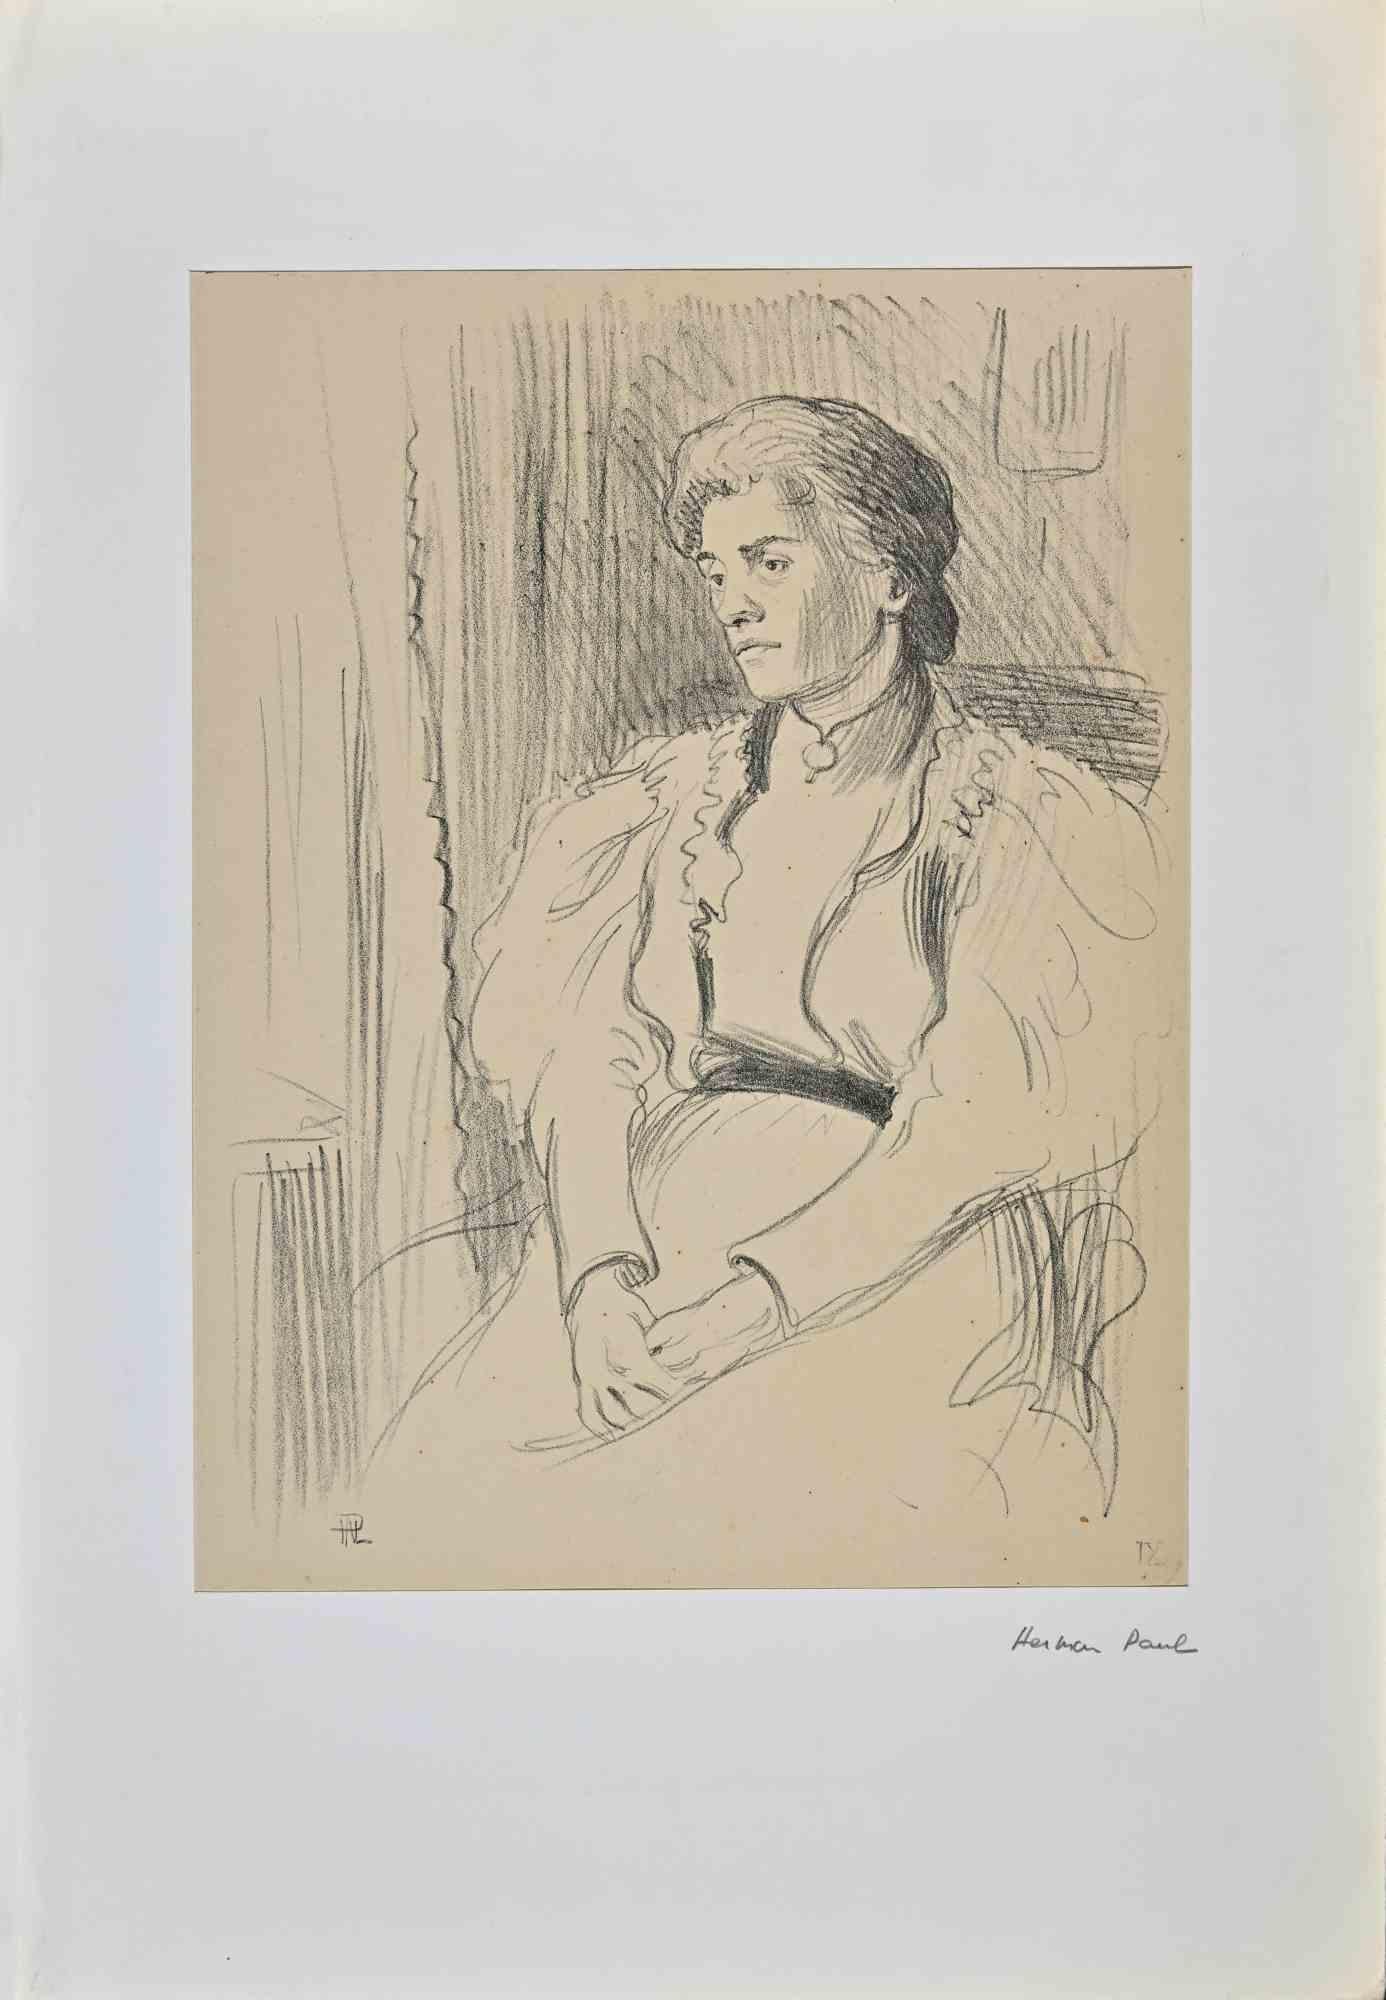 Portrait of a Lady is a Pencil Drawing realized by Hermann Paul. 

Hand signed on the lower left corner. Passpartout included cm 51x35

Good condition.

René Georges Hermann-Paul (27 December 1864 – 23 June 1940) was a French artist. He was born in